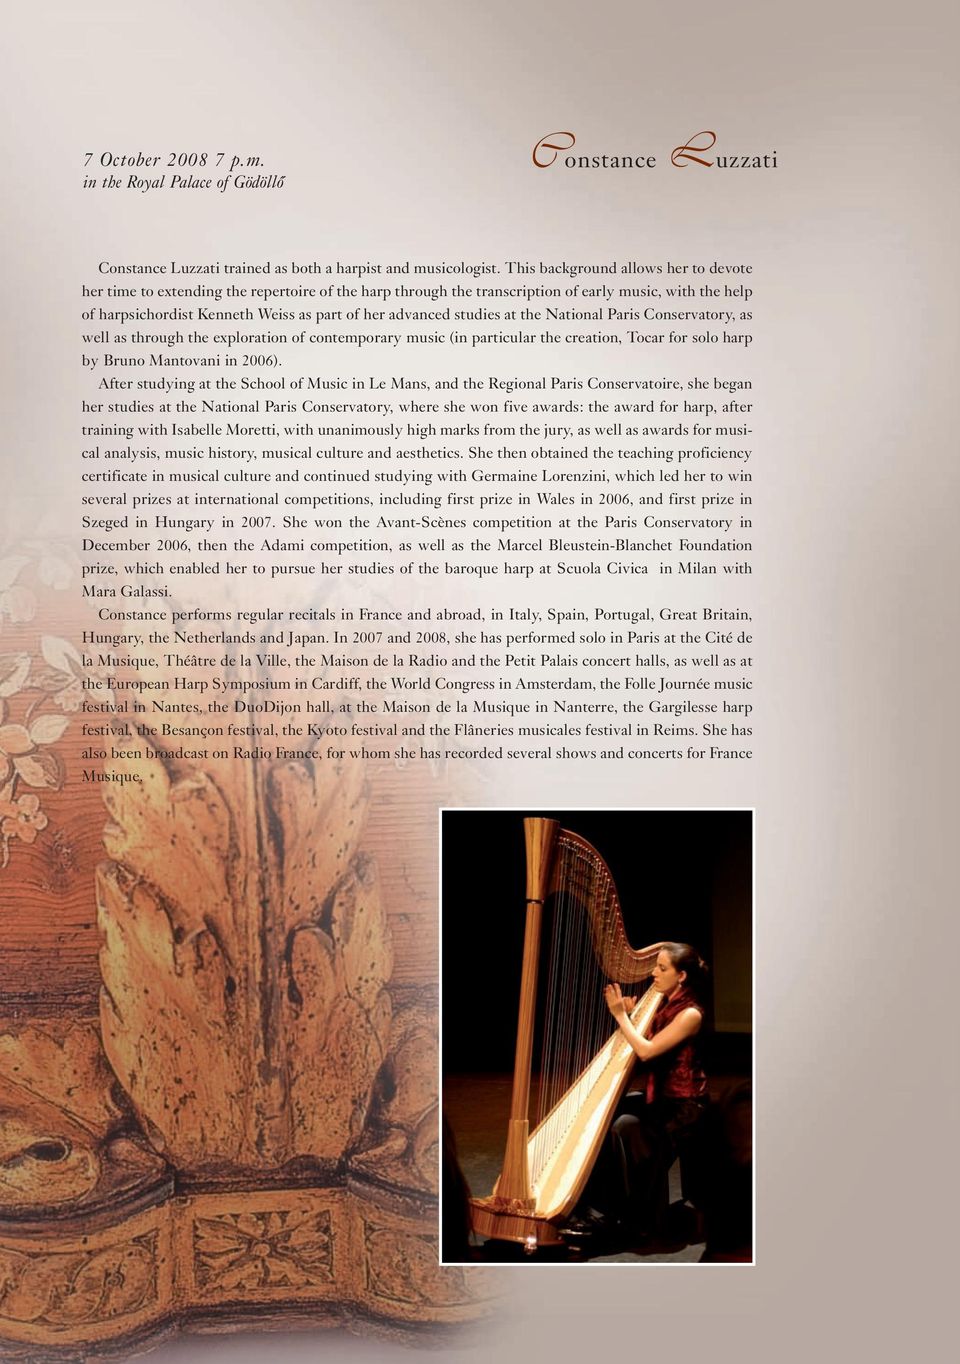 studies at the National Paris Conservatory, as well as through the exploration of contemporary music (in particular the creation, Tocar for solo harp by Bruno Mantovani in 2006).